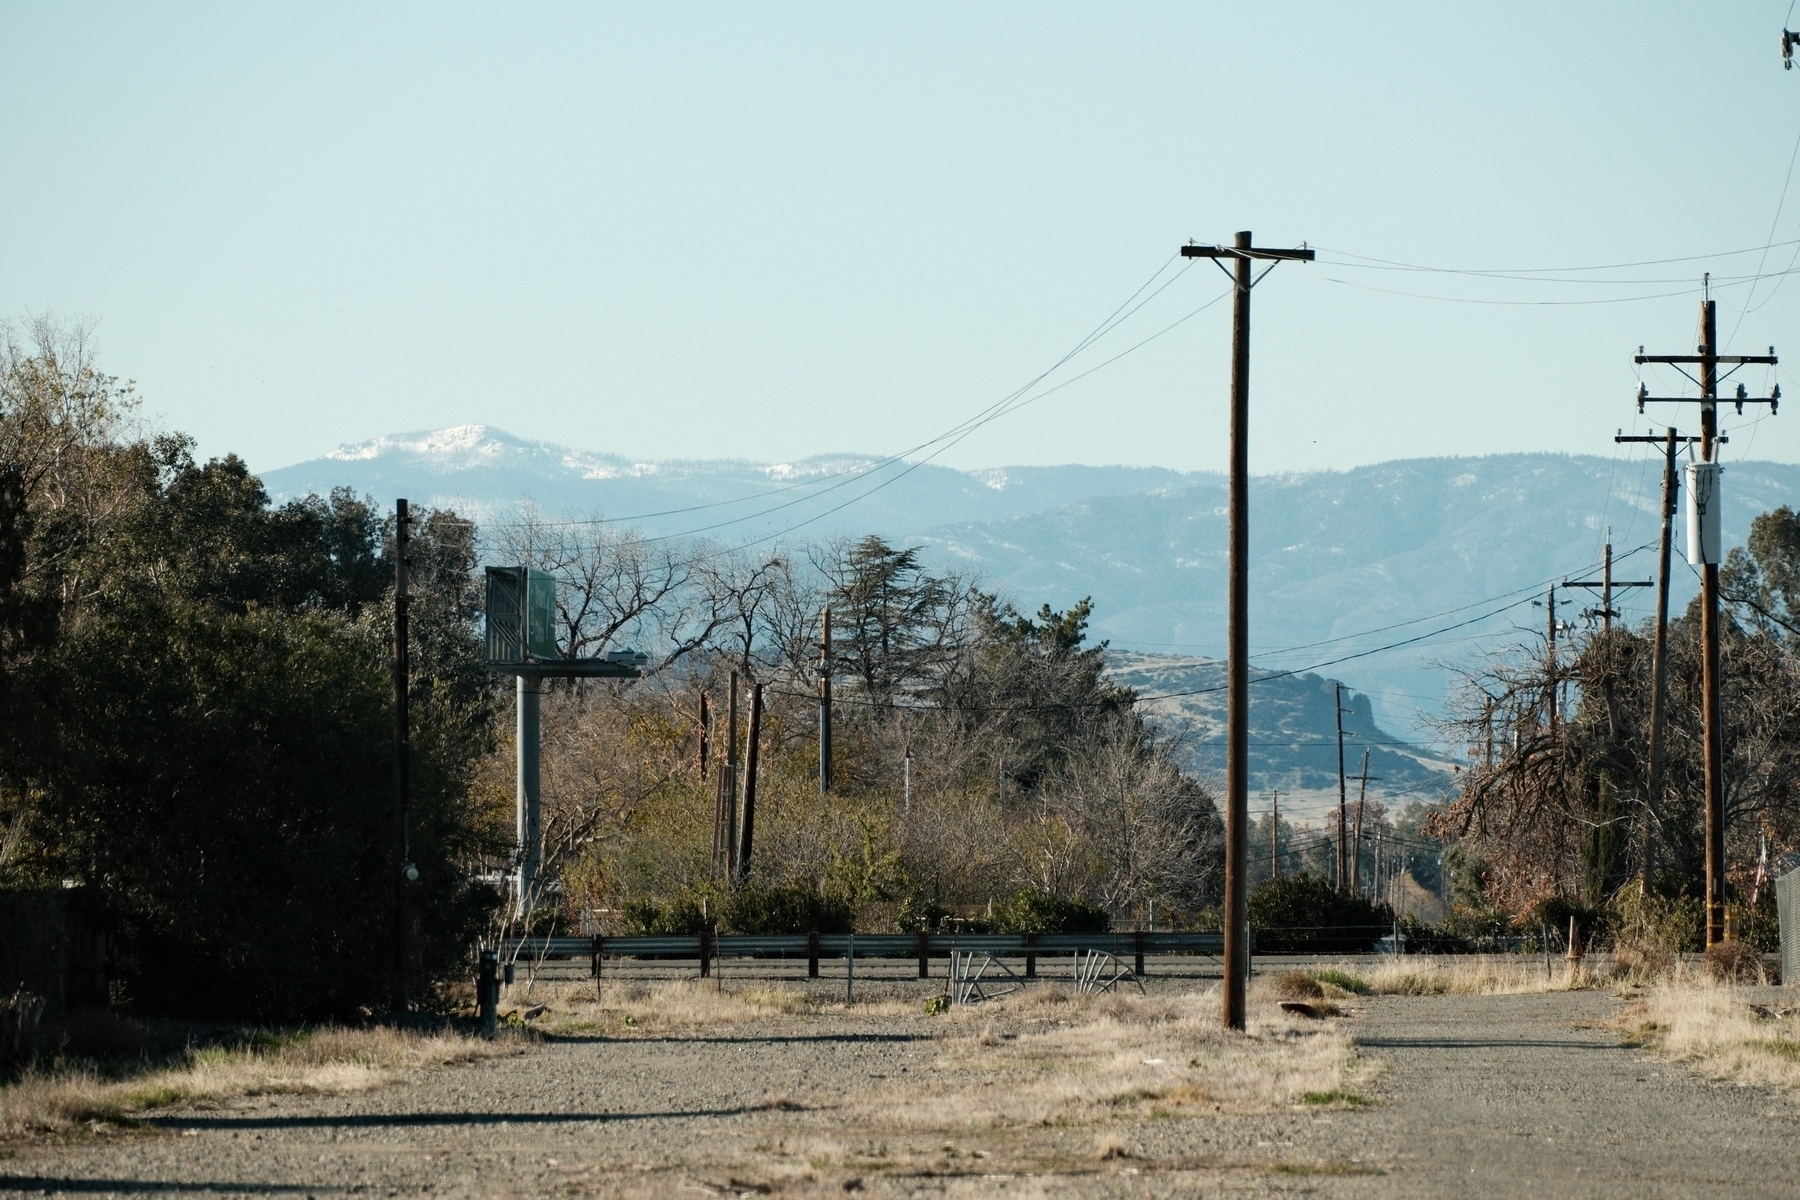 a distant snowy peak on the left and a vertical butte on the right. multiple power lines cross the view. 